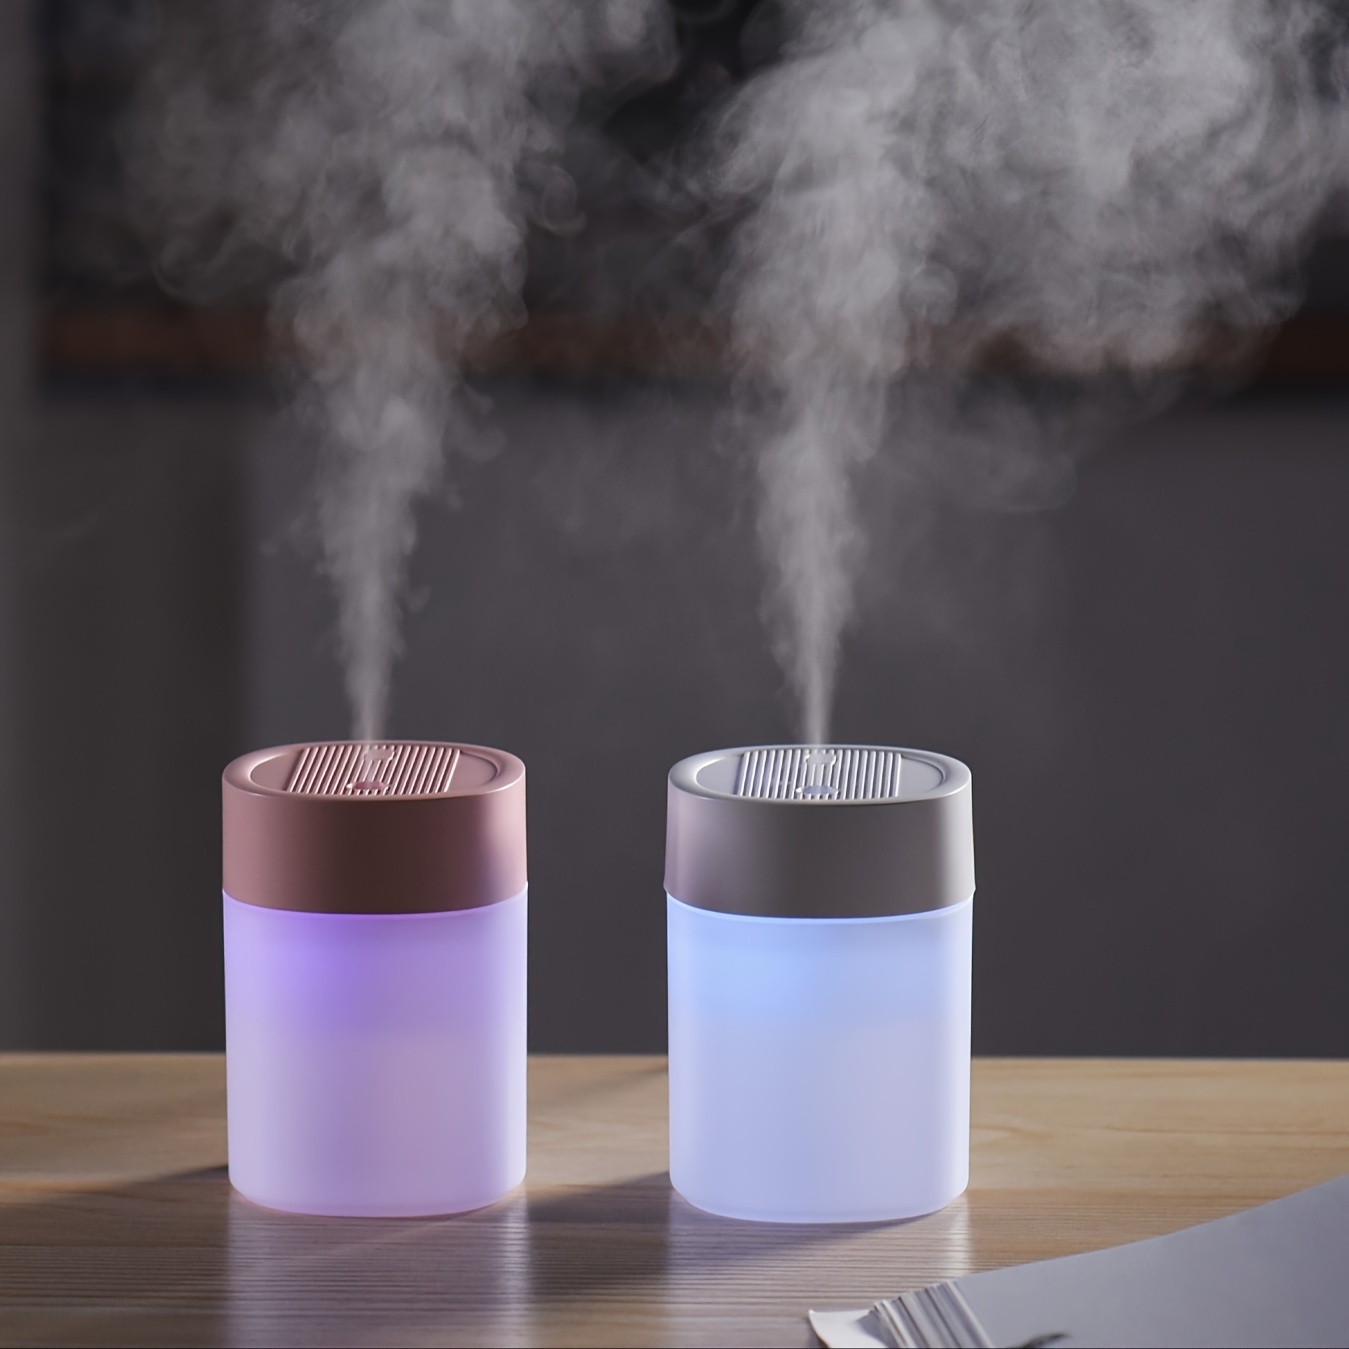 MINI Humidifier 220ML, Ultrasonic USB Desktop Mini Air Humidifier with USB  Interface, Color Night Light Function, Automatic Shutdown, Suitable for